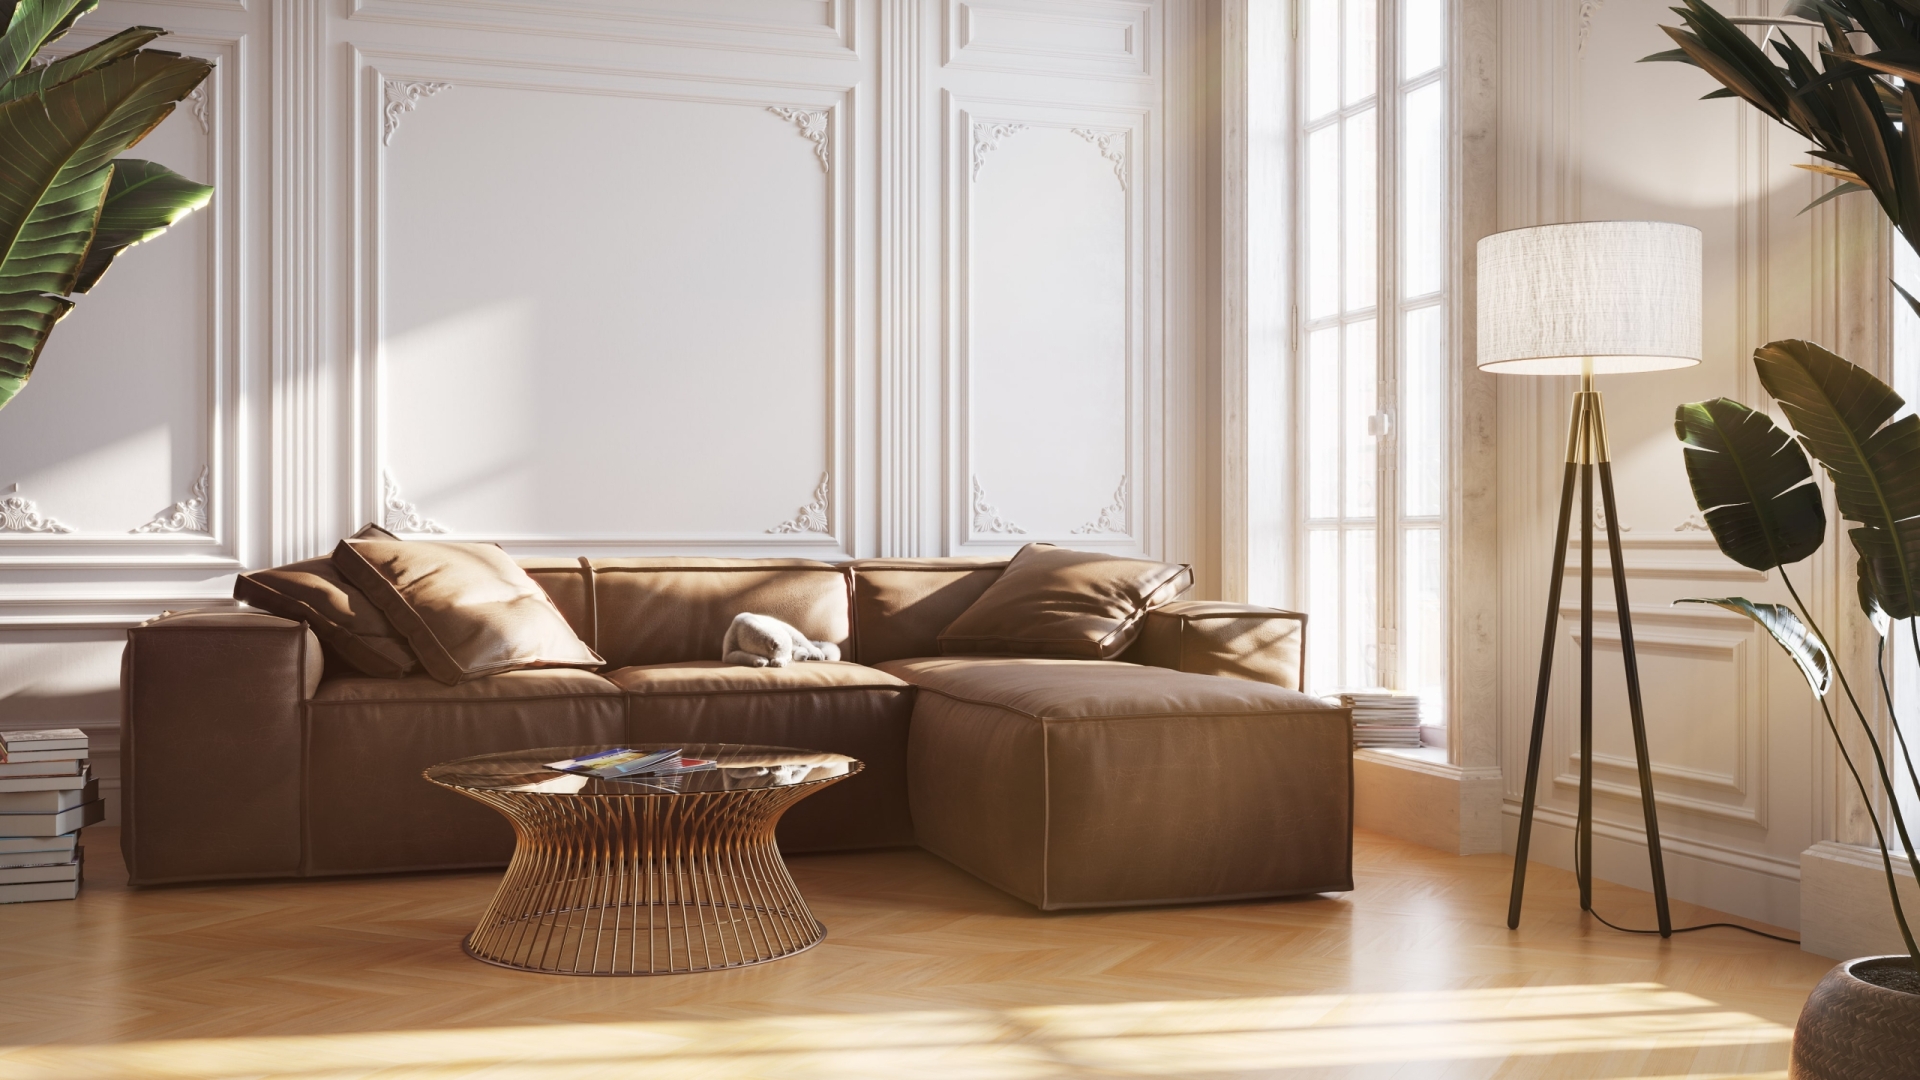 3D Product Visualization for a Soft Sofa